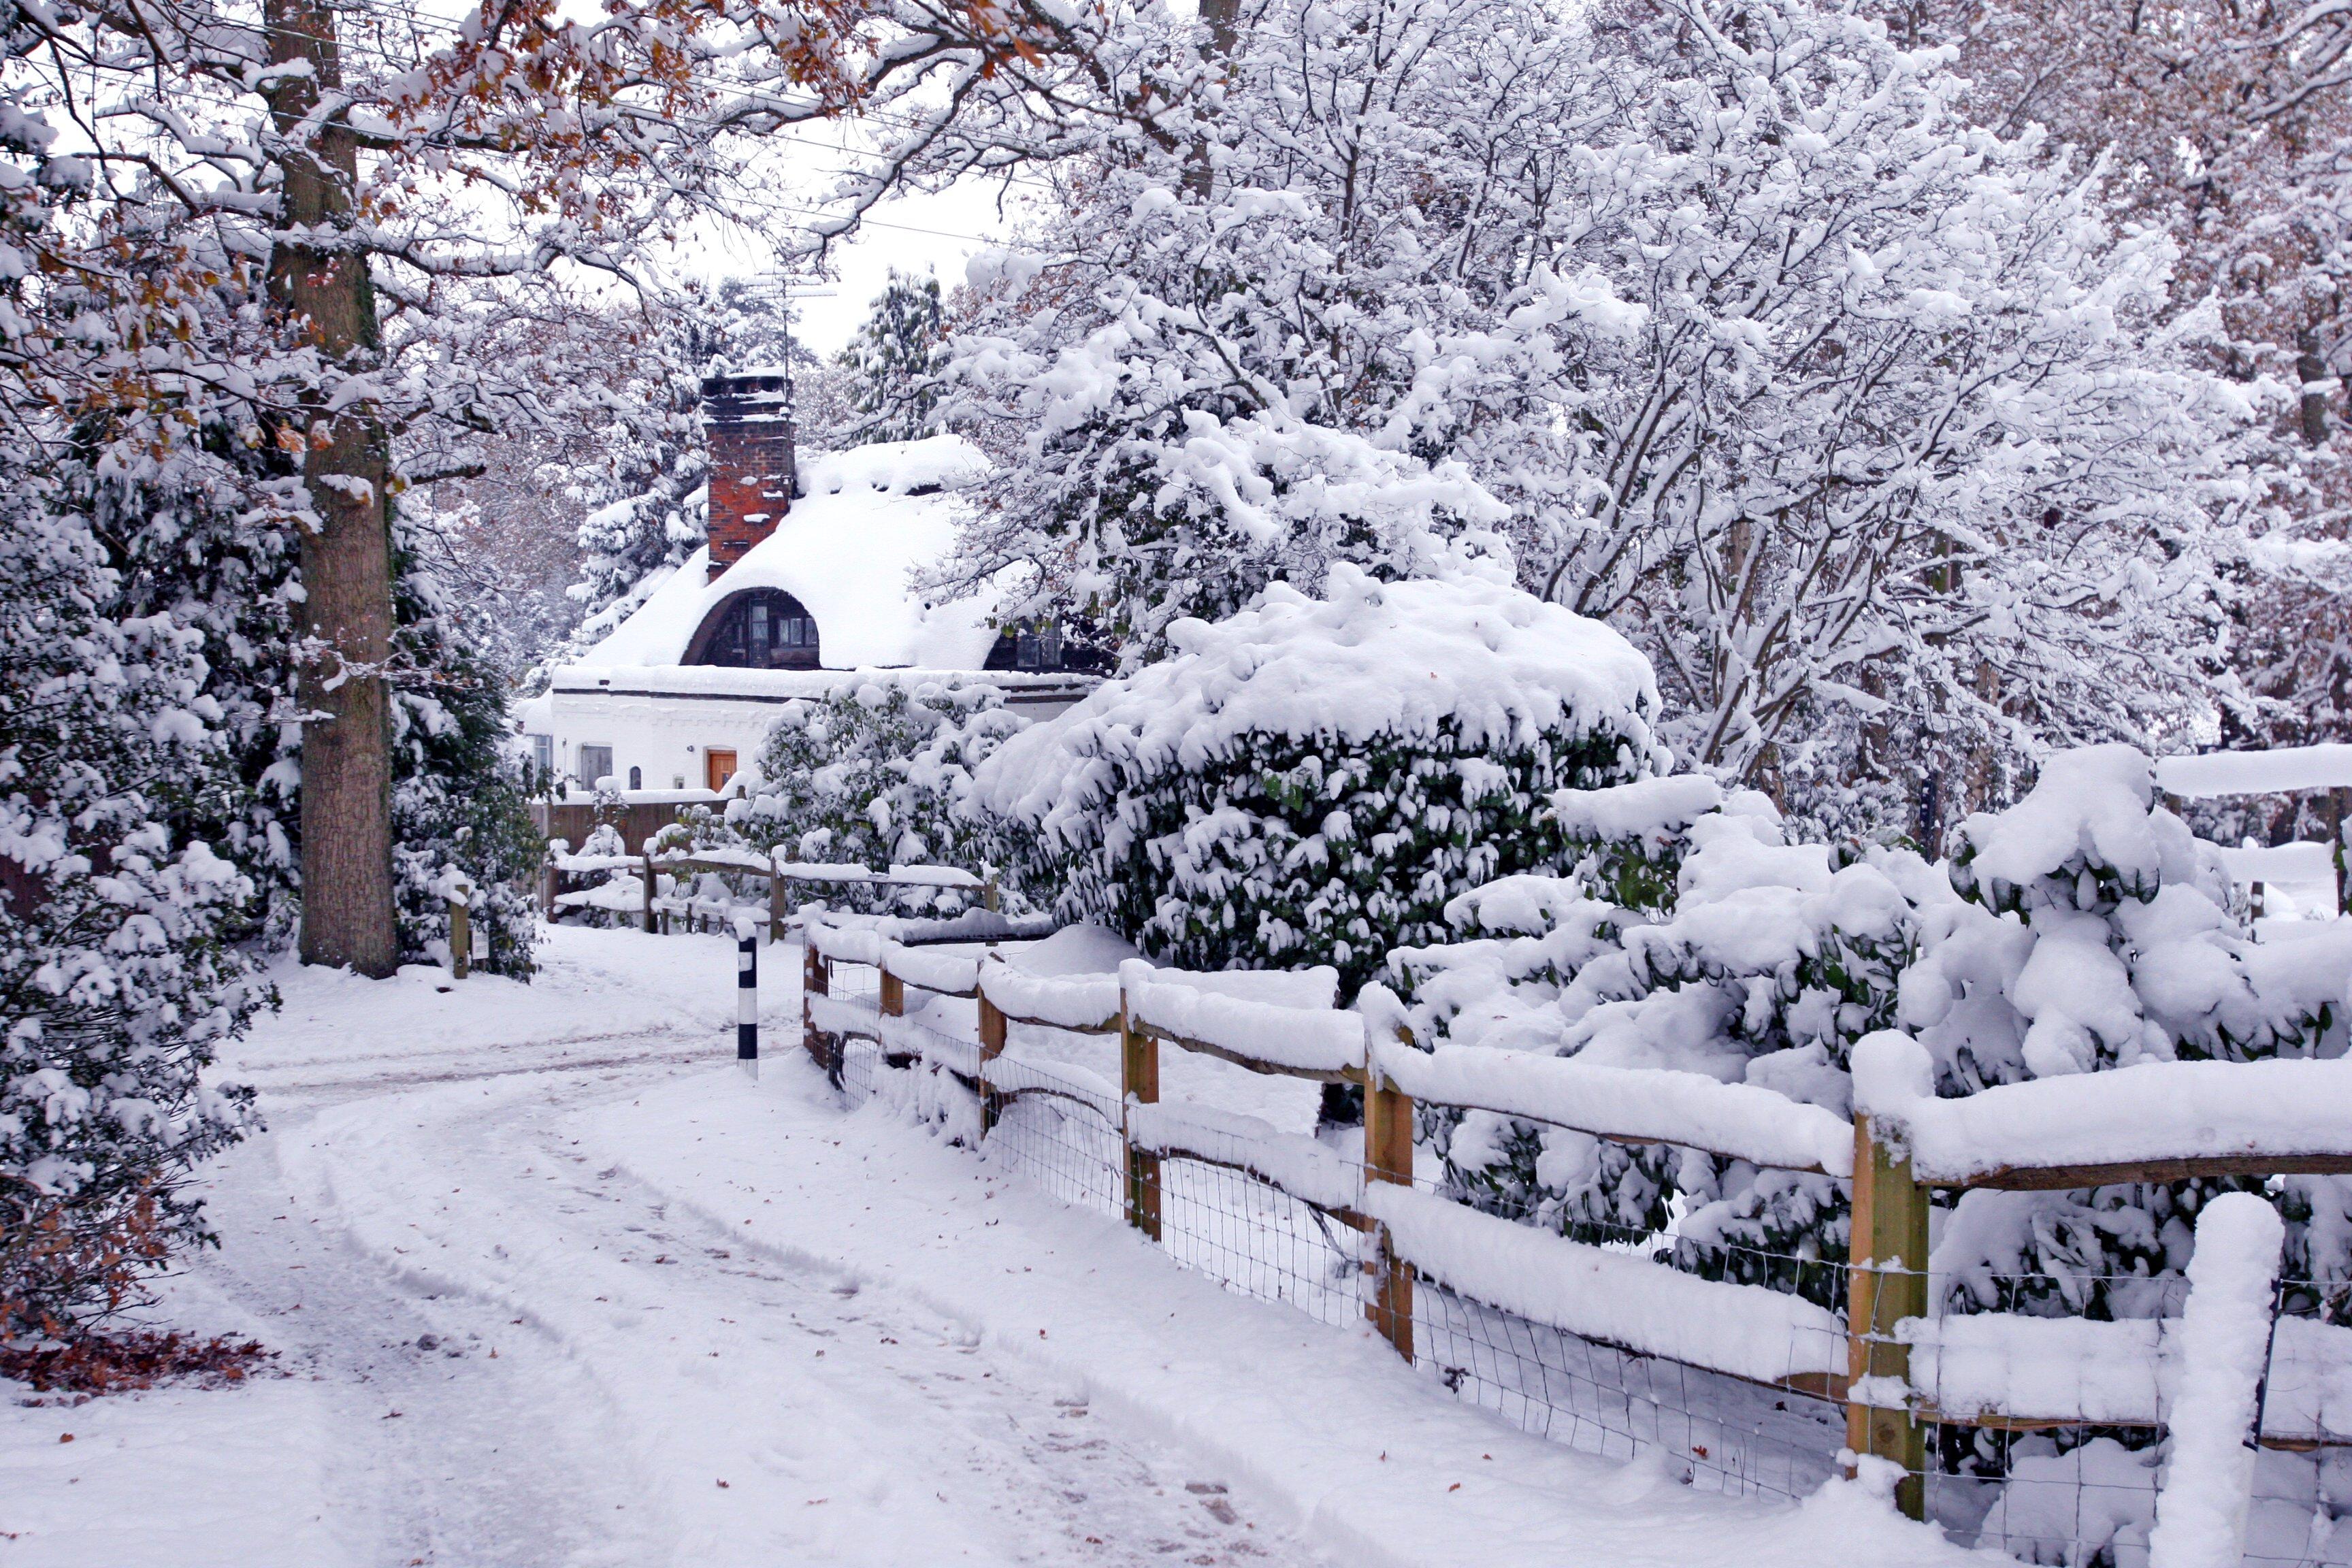 A picture-perfect snowy scene in West Chiltington in December 2010